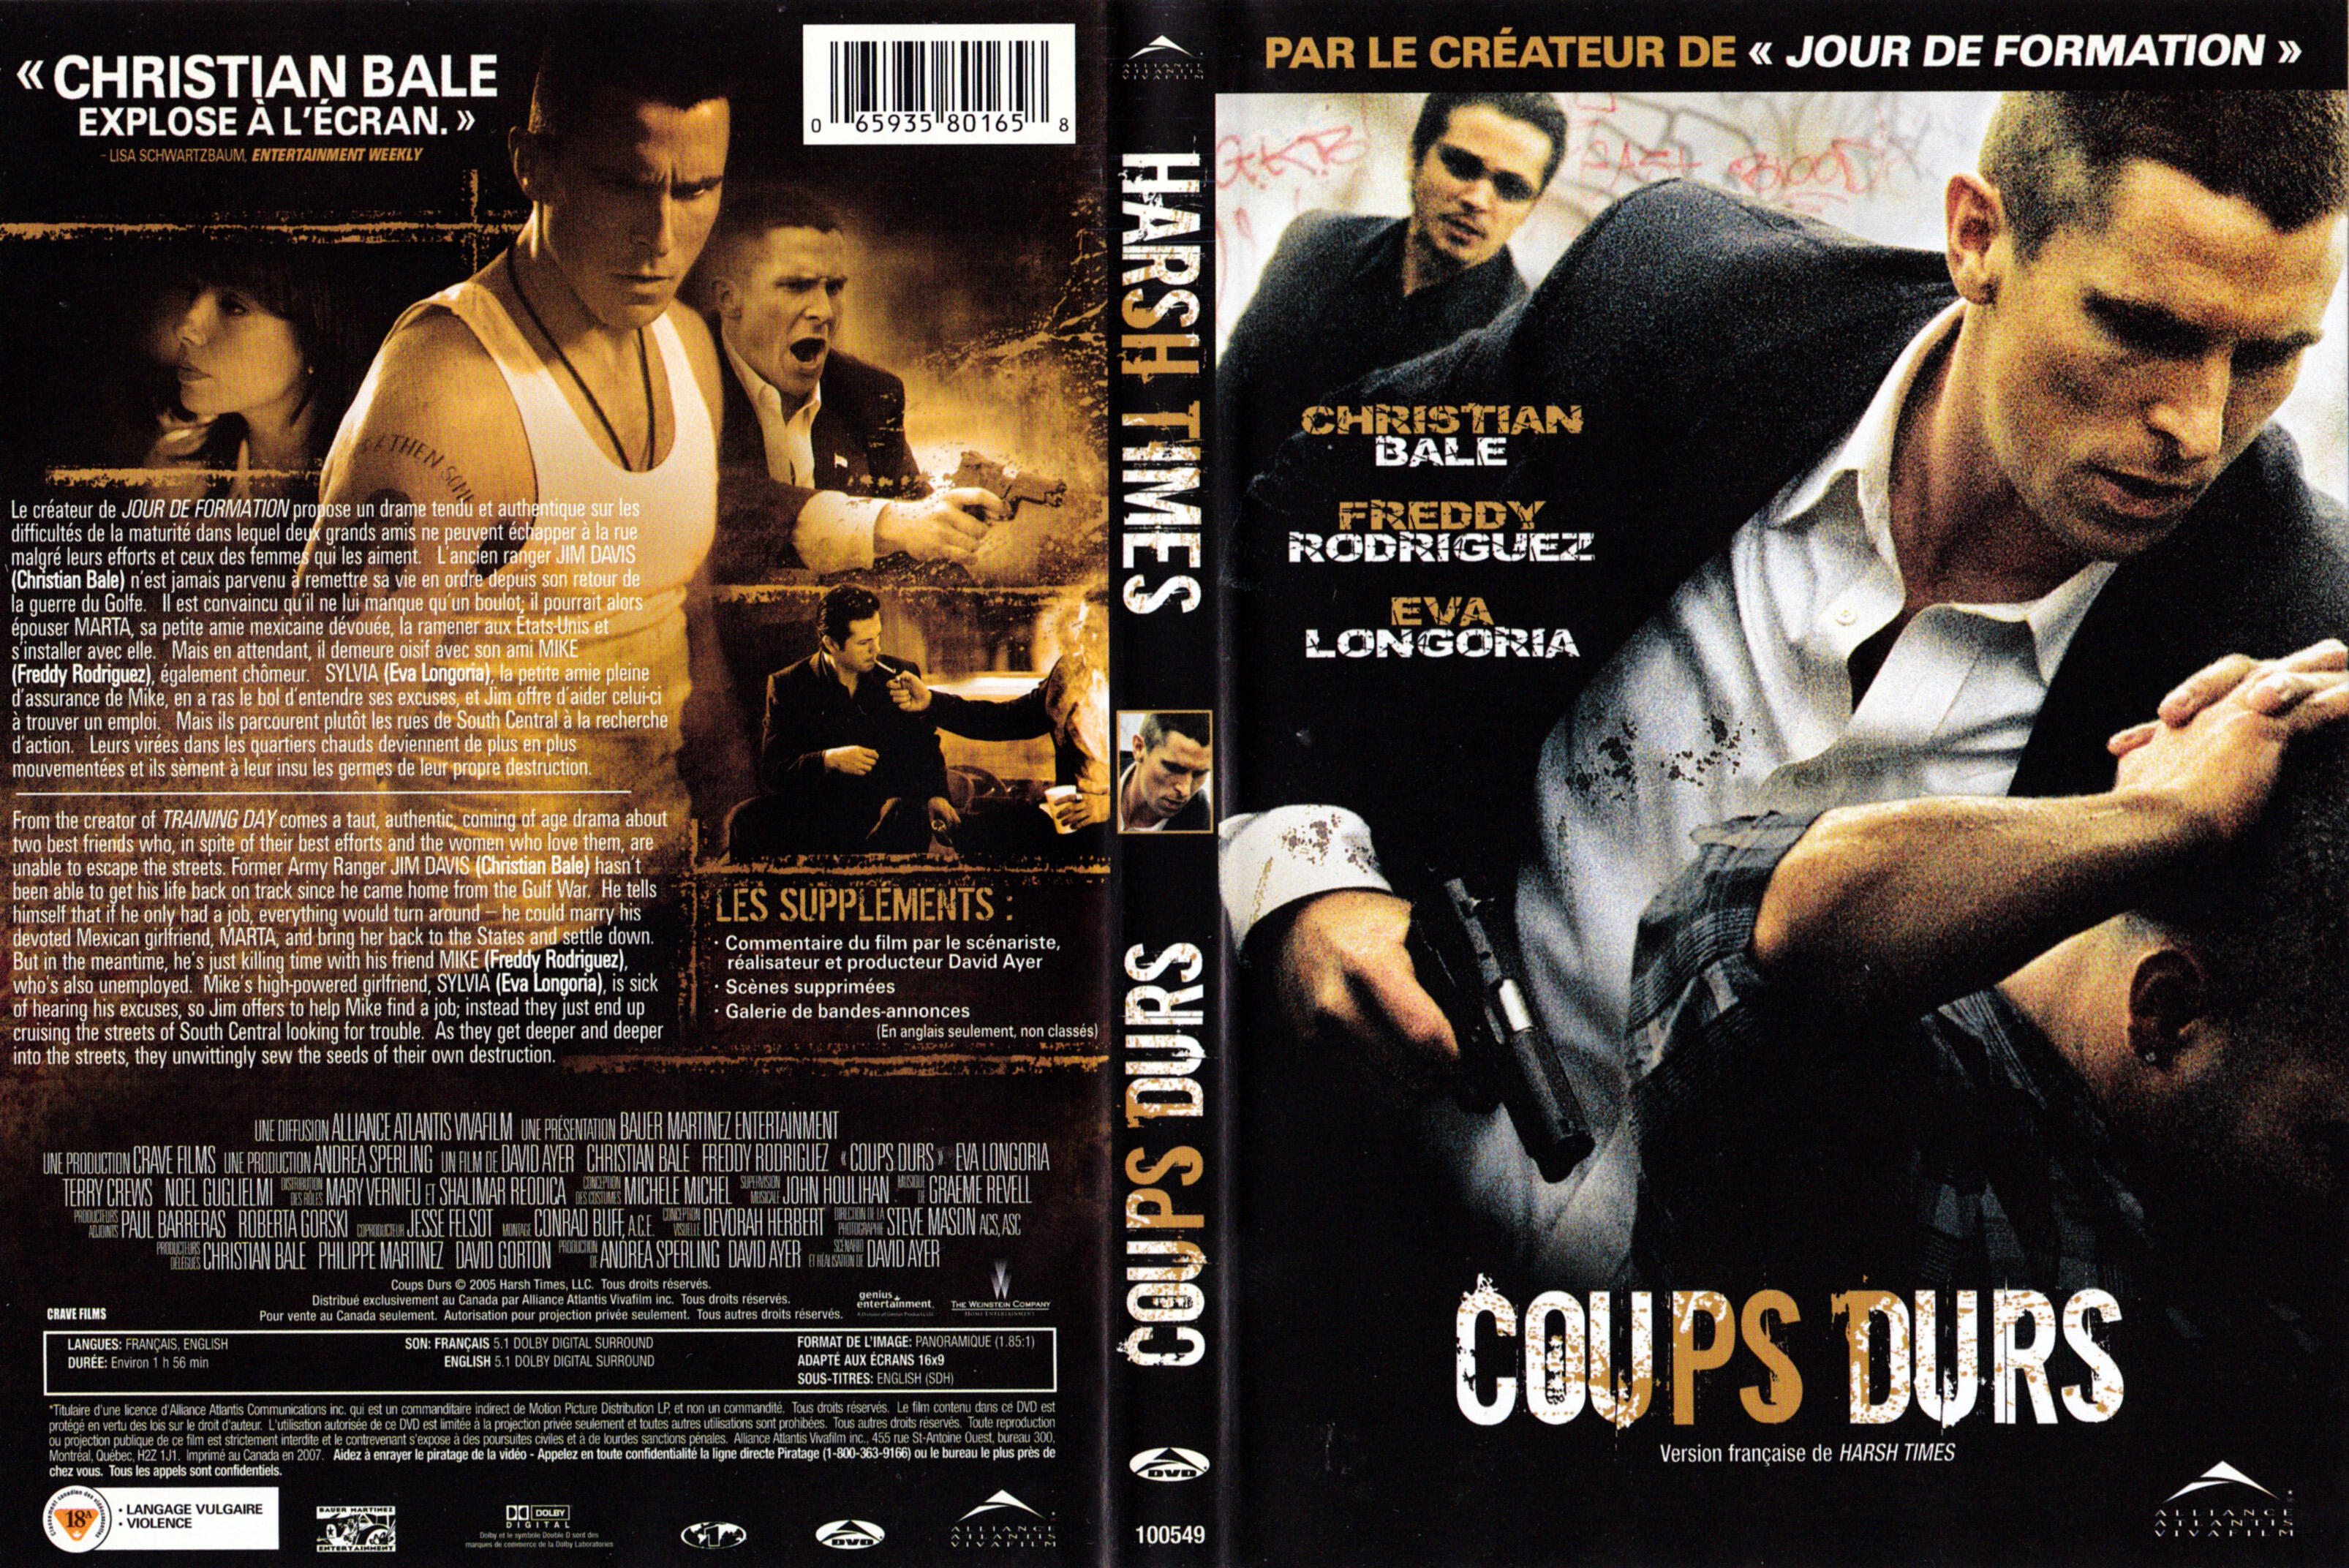 Jaquette DVD Coups durs - Harsh times (Canadienne)